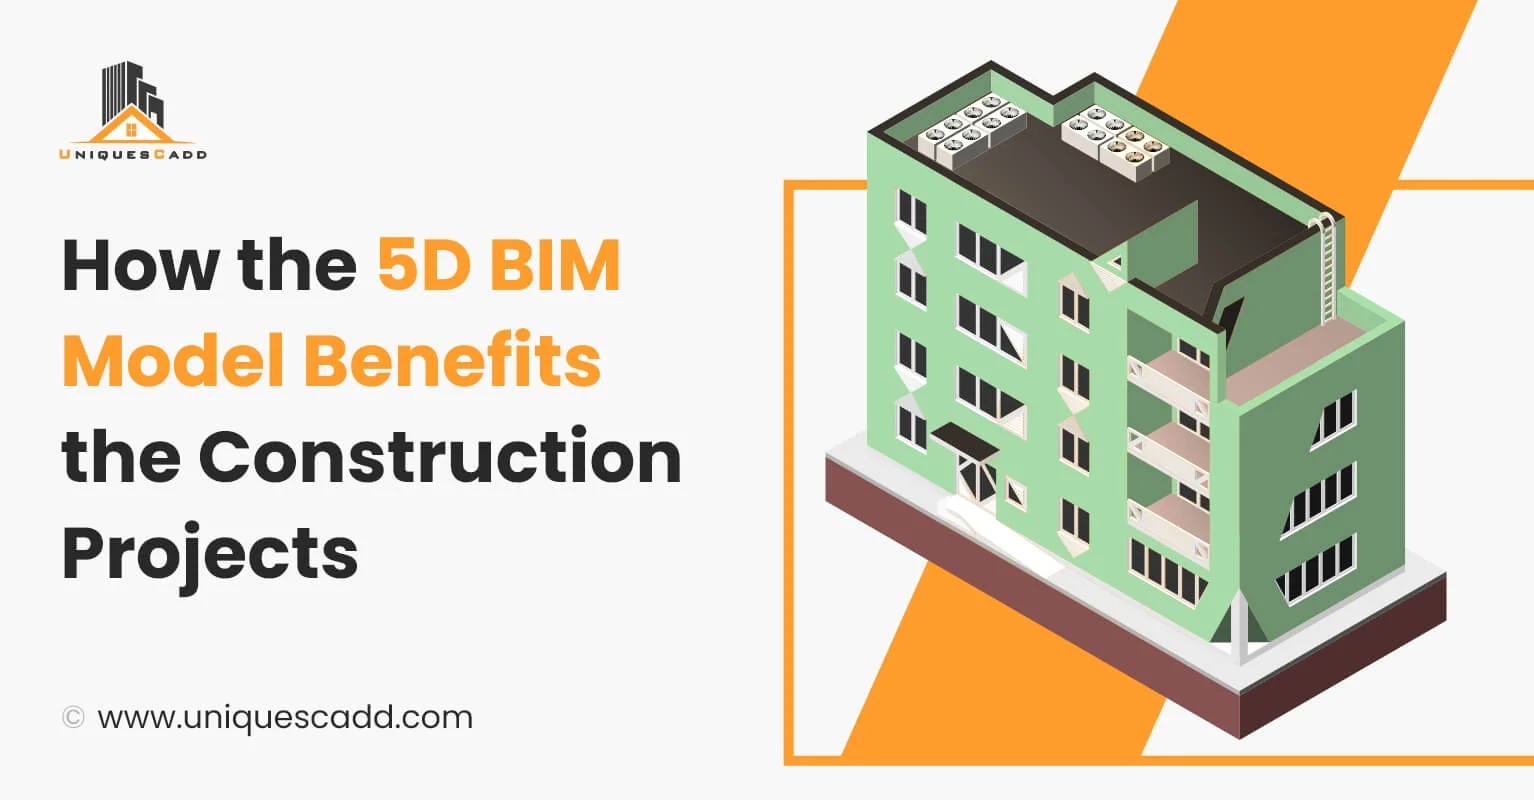 How the 5D BIM Model Benefits the Construction Projects